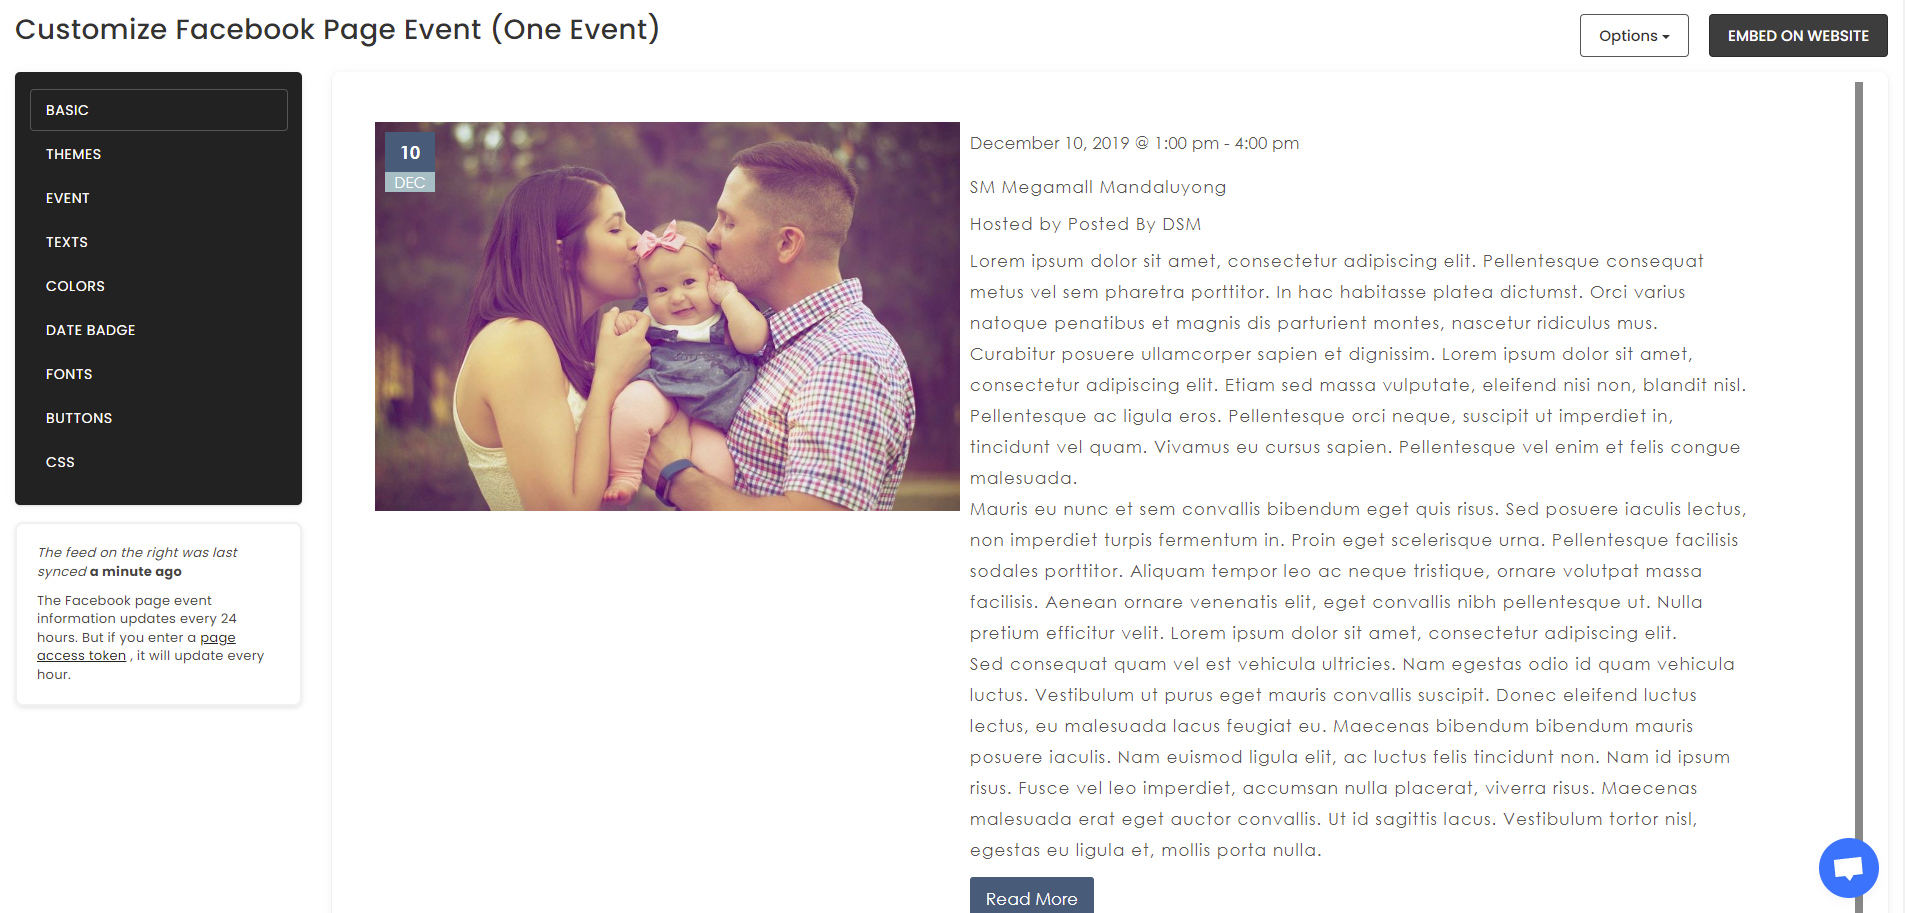 Customize your feed - How To Embed Facebook Page Event (One Event) On Shopify Website For Free?